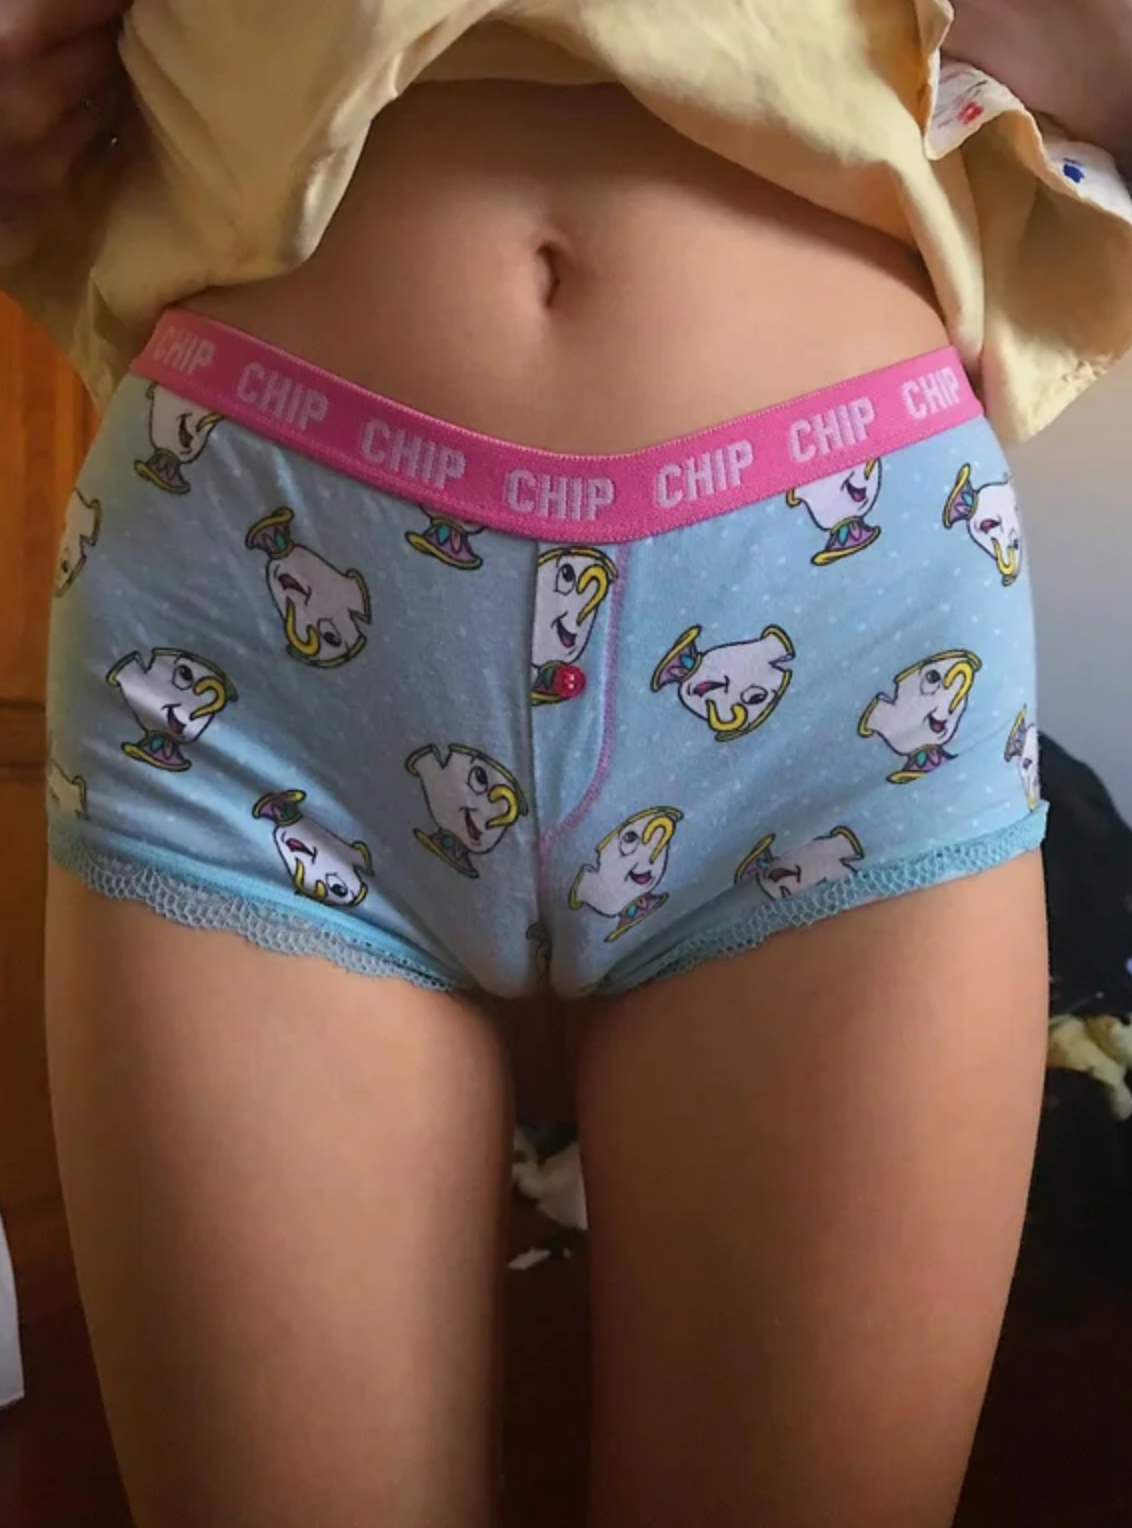 girl wearing beauty and the beast 'chip' underwear camel toe